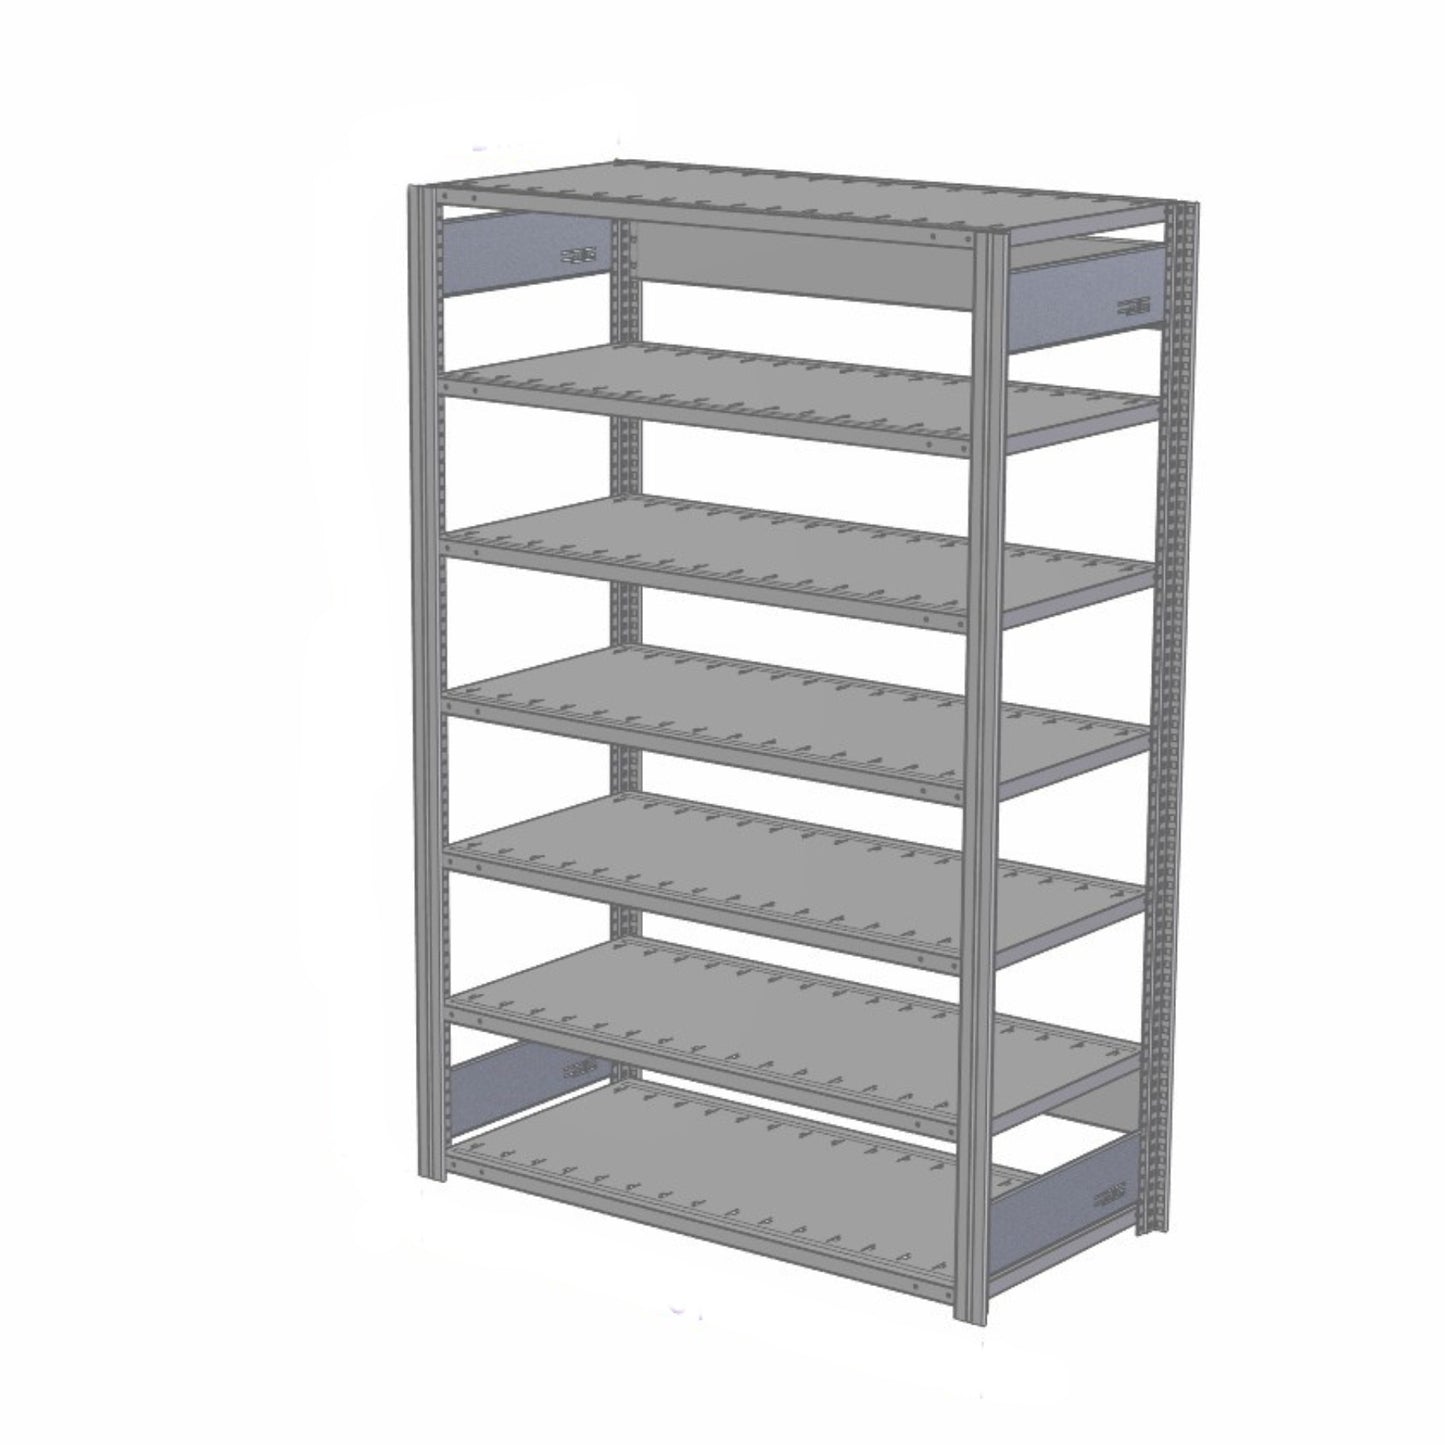 Shelving system 99 height x 48 width x 12 depth | Option: Open / Closed